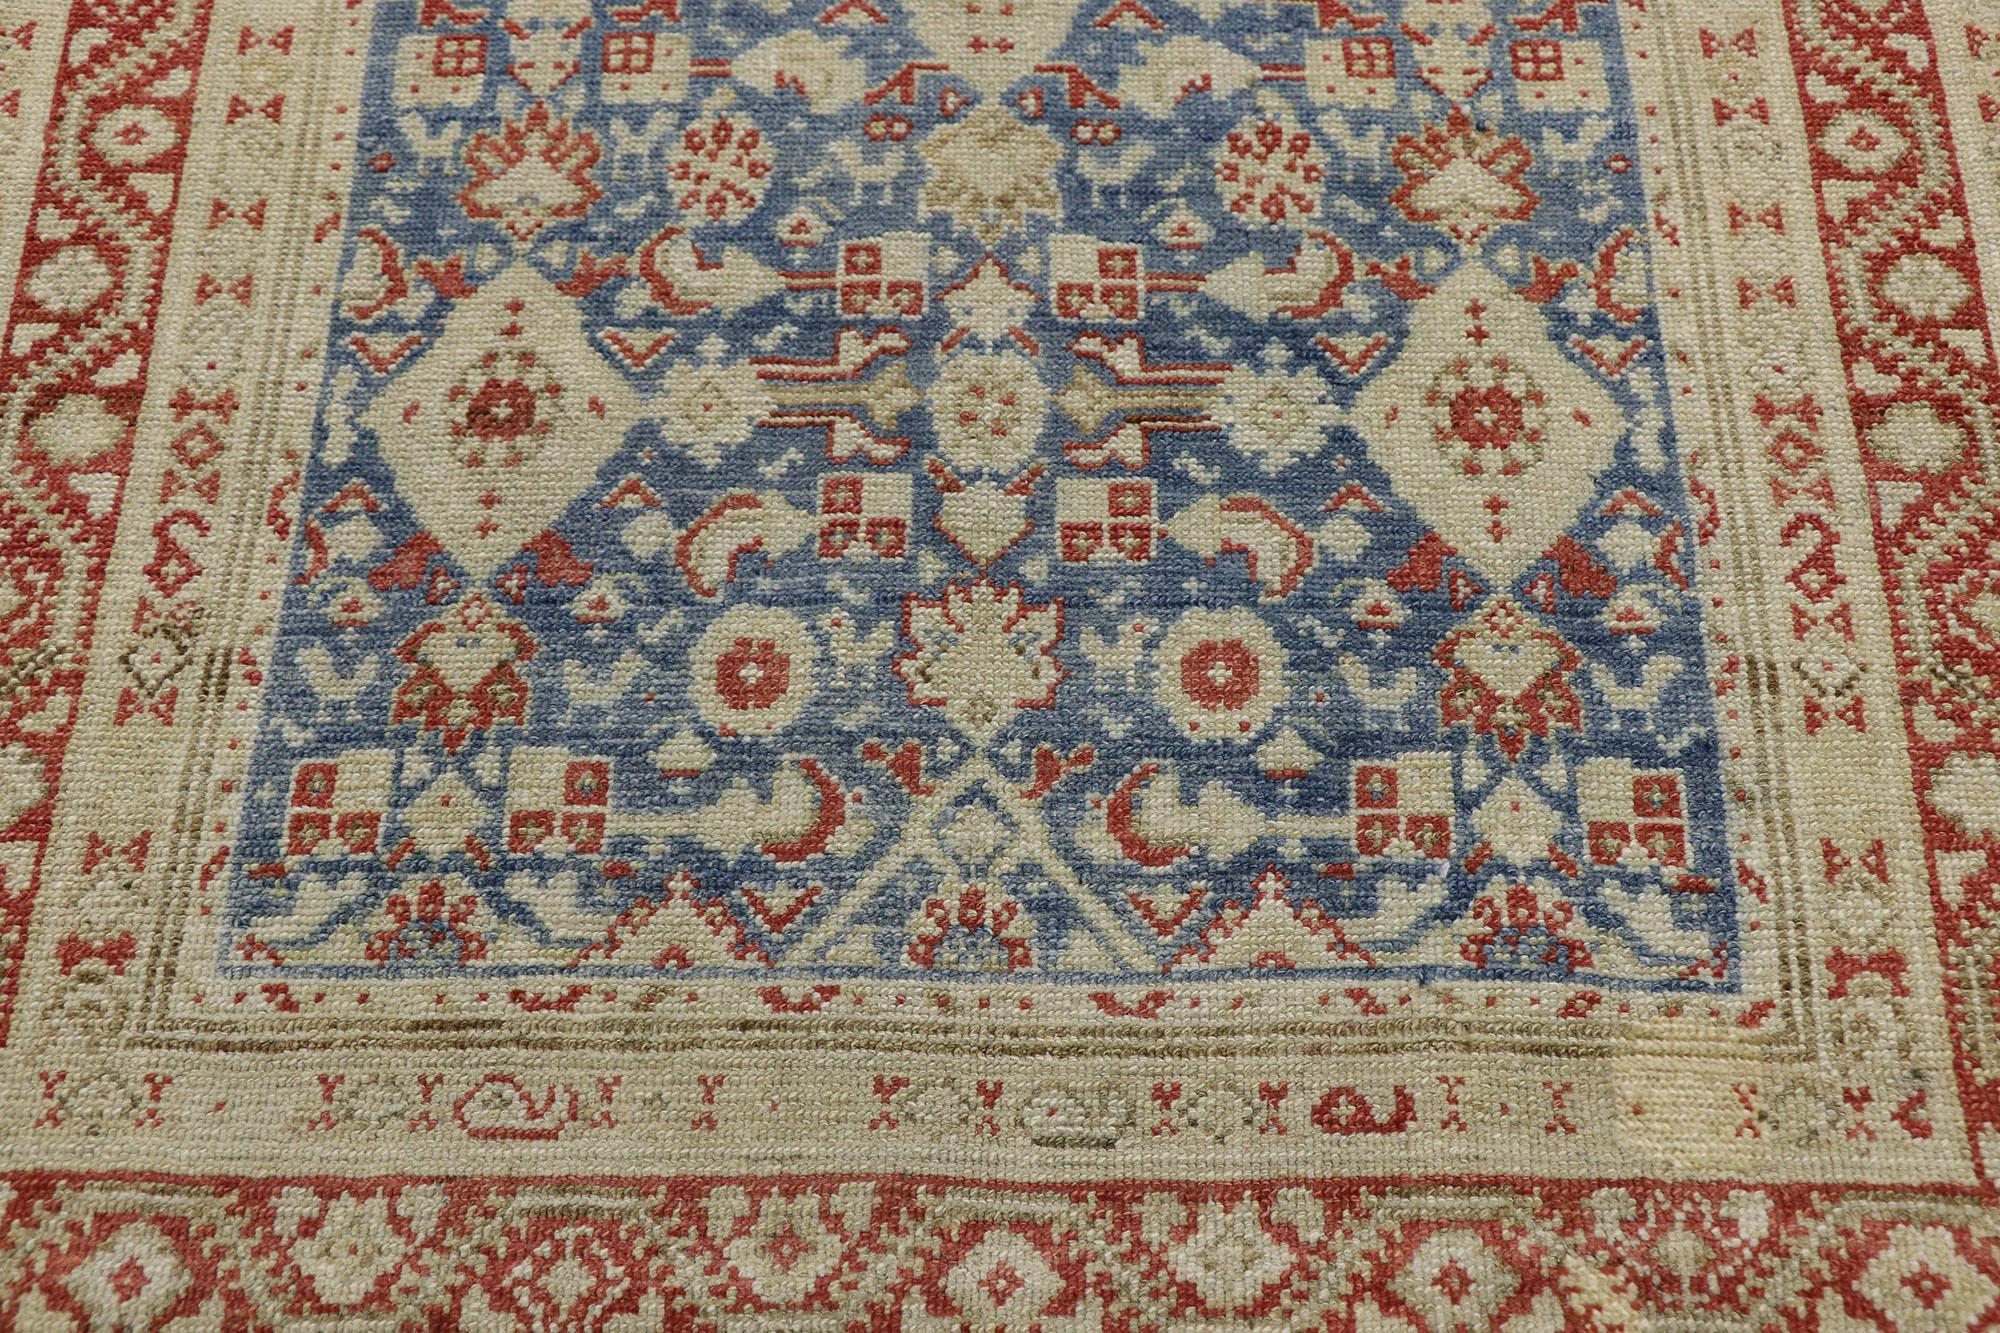 Distressed Antique Persian Malayer Runner with Relaxed Federal Style In Good Condition For Sale In Dallas, TX